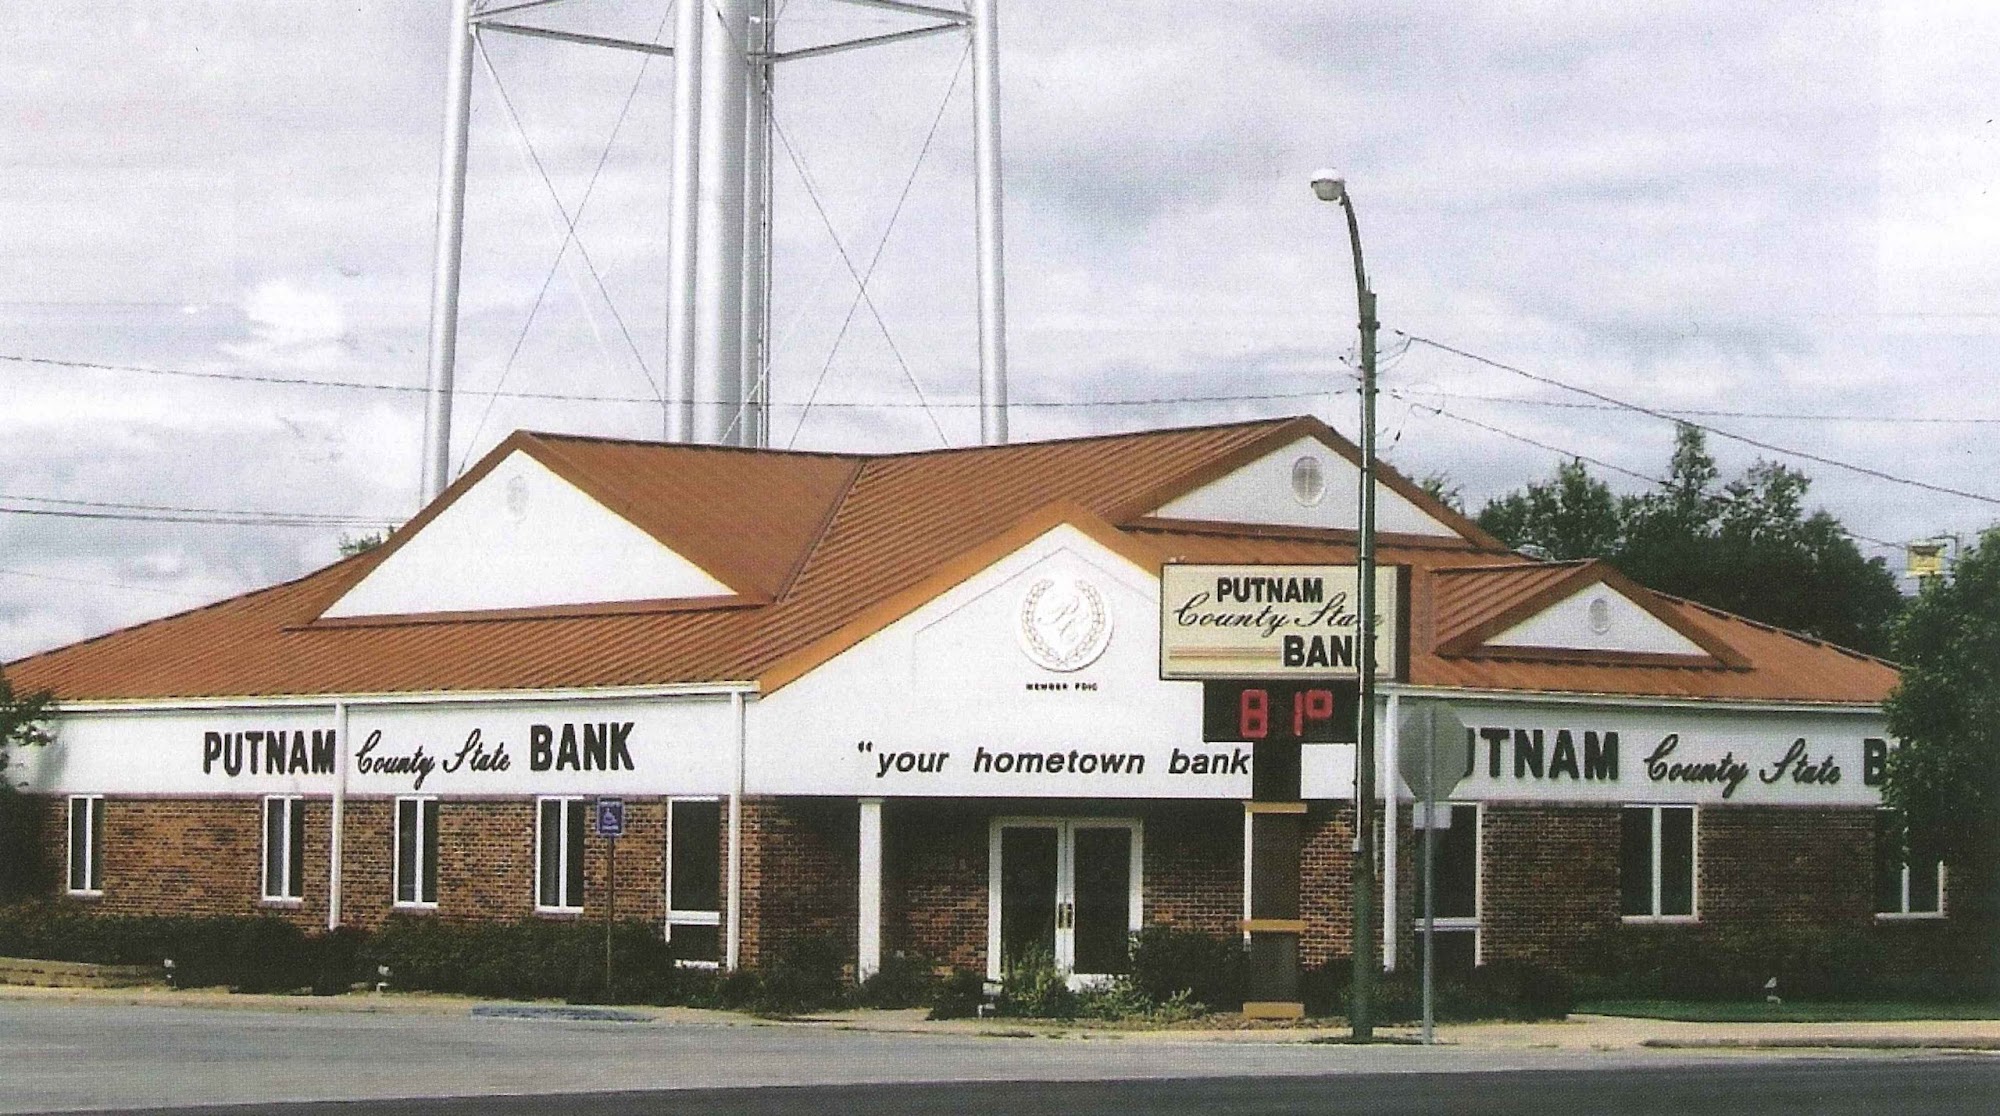 Putnam County State Bank